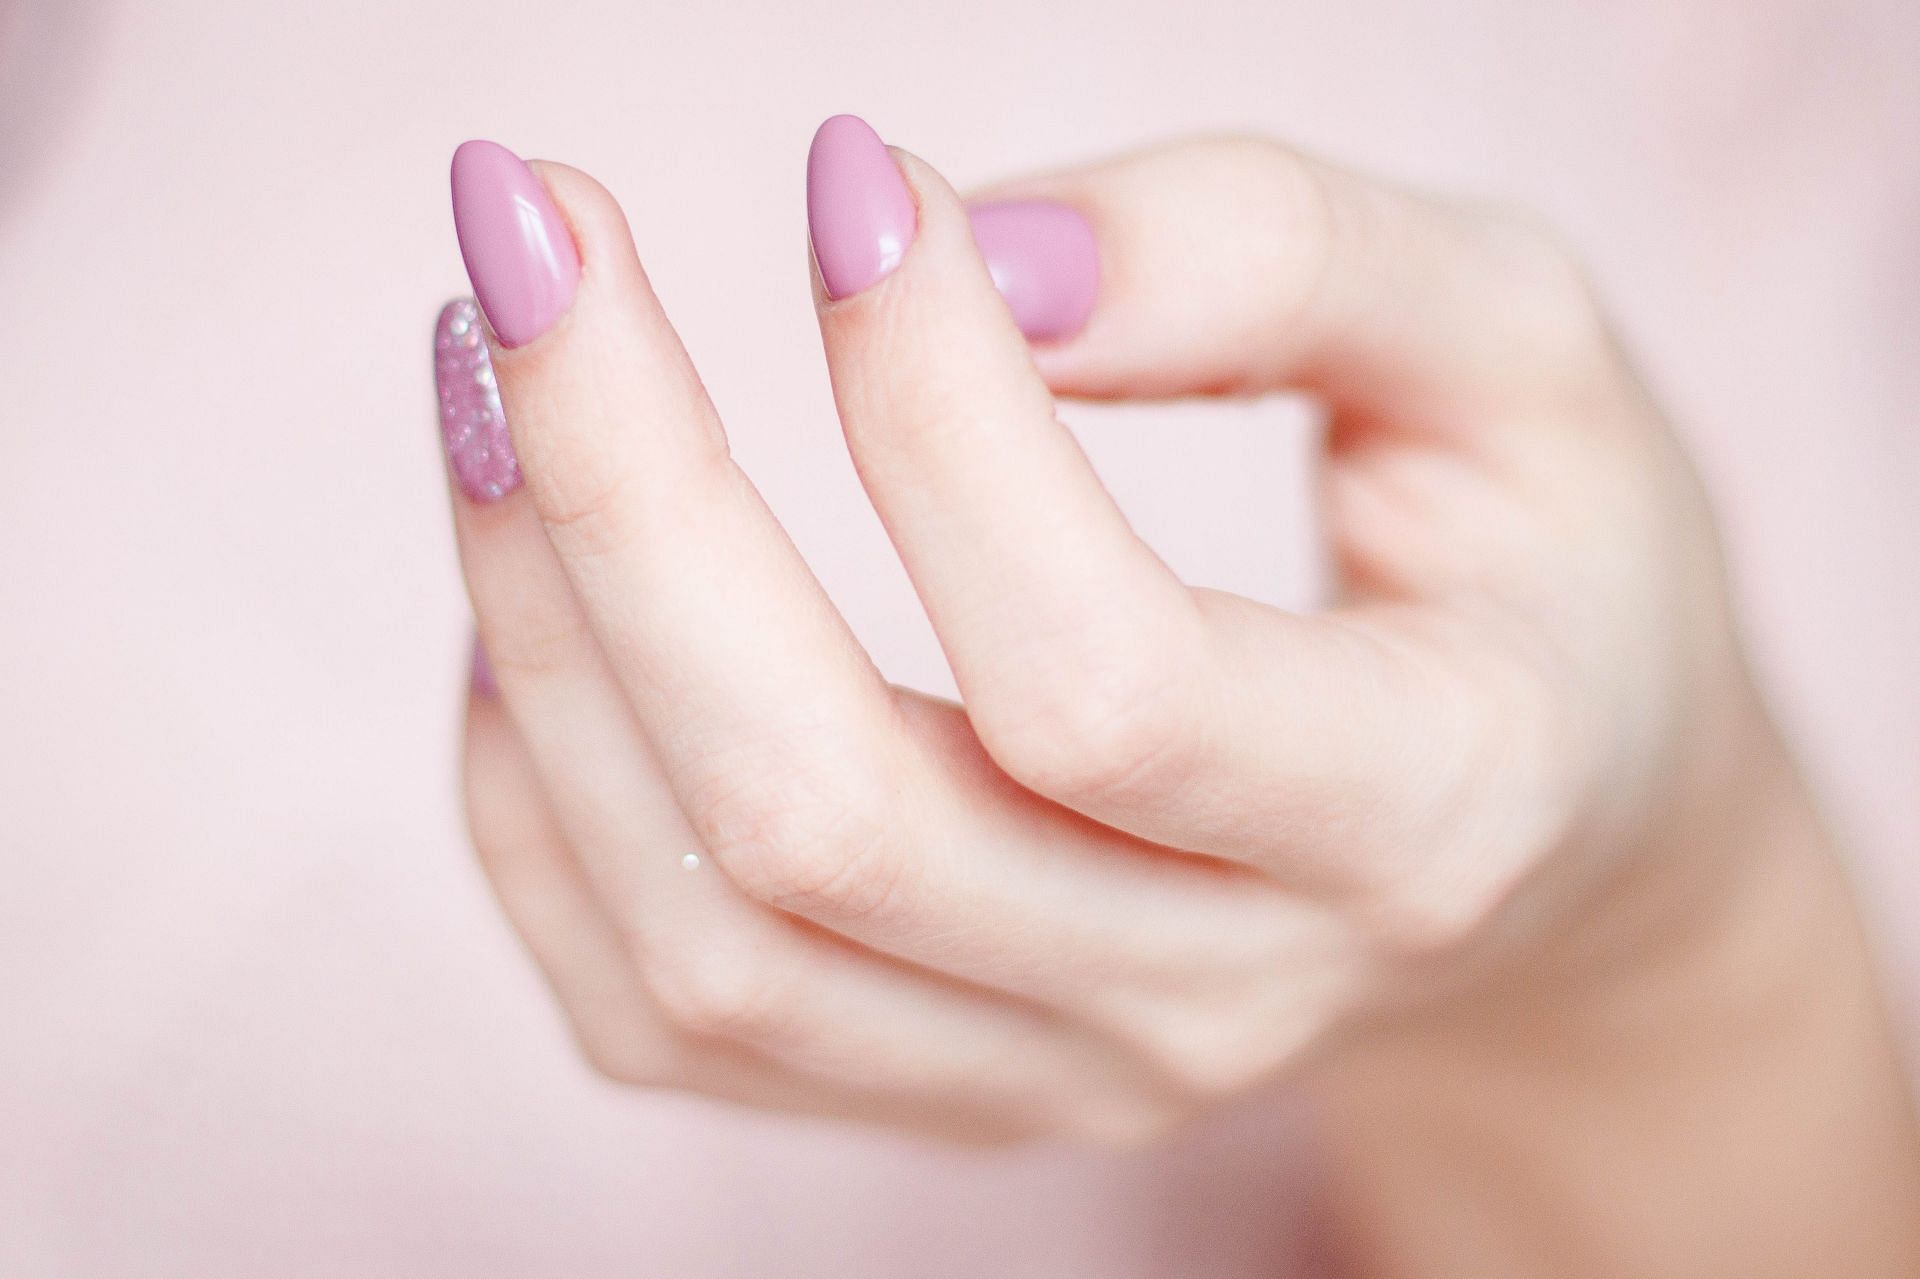 Importance of healthy nails (image sourced via Pexels / Photo by valeria)